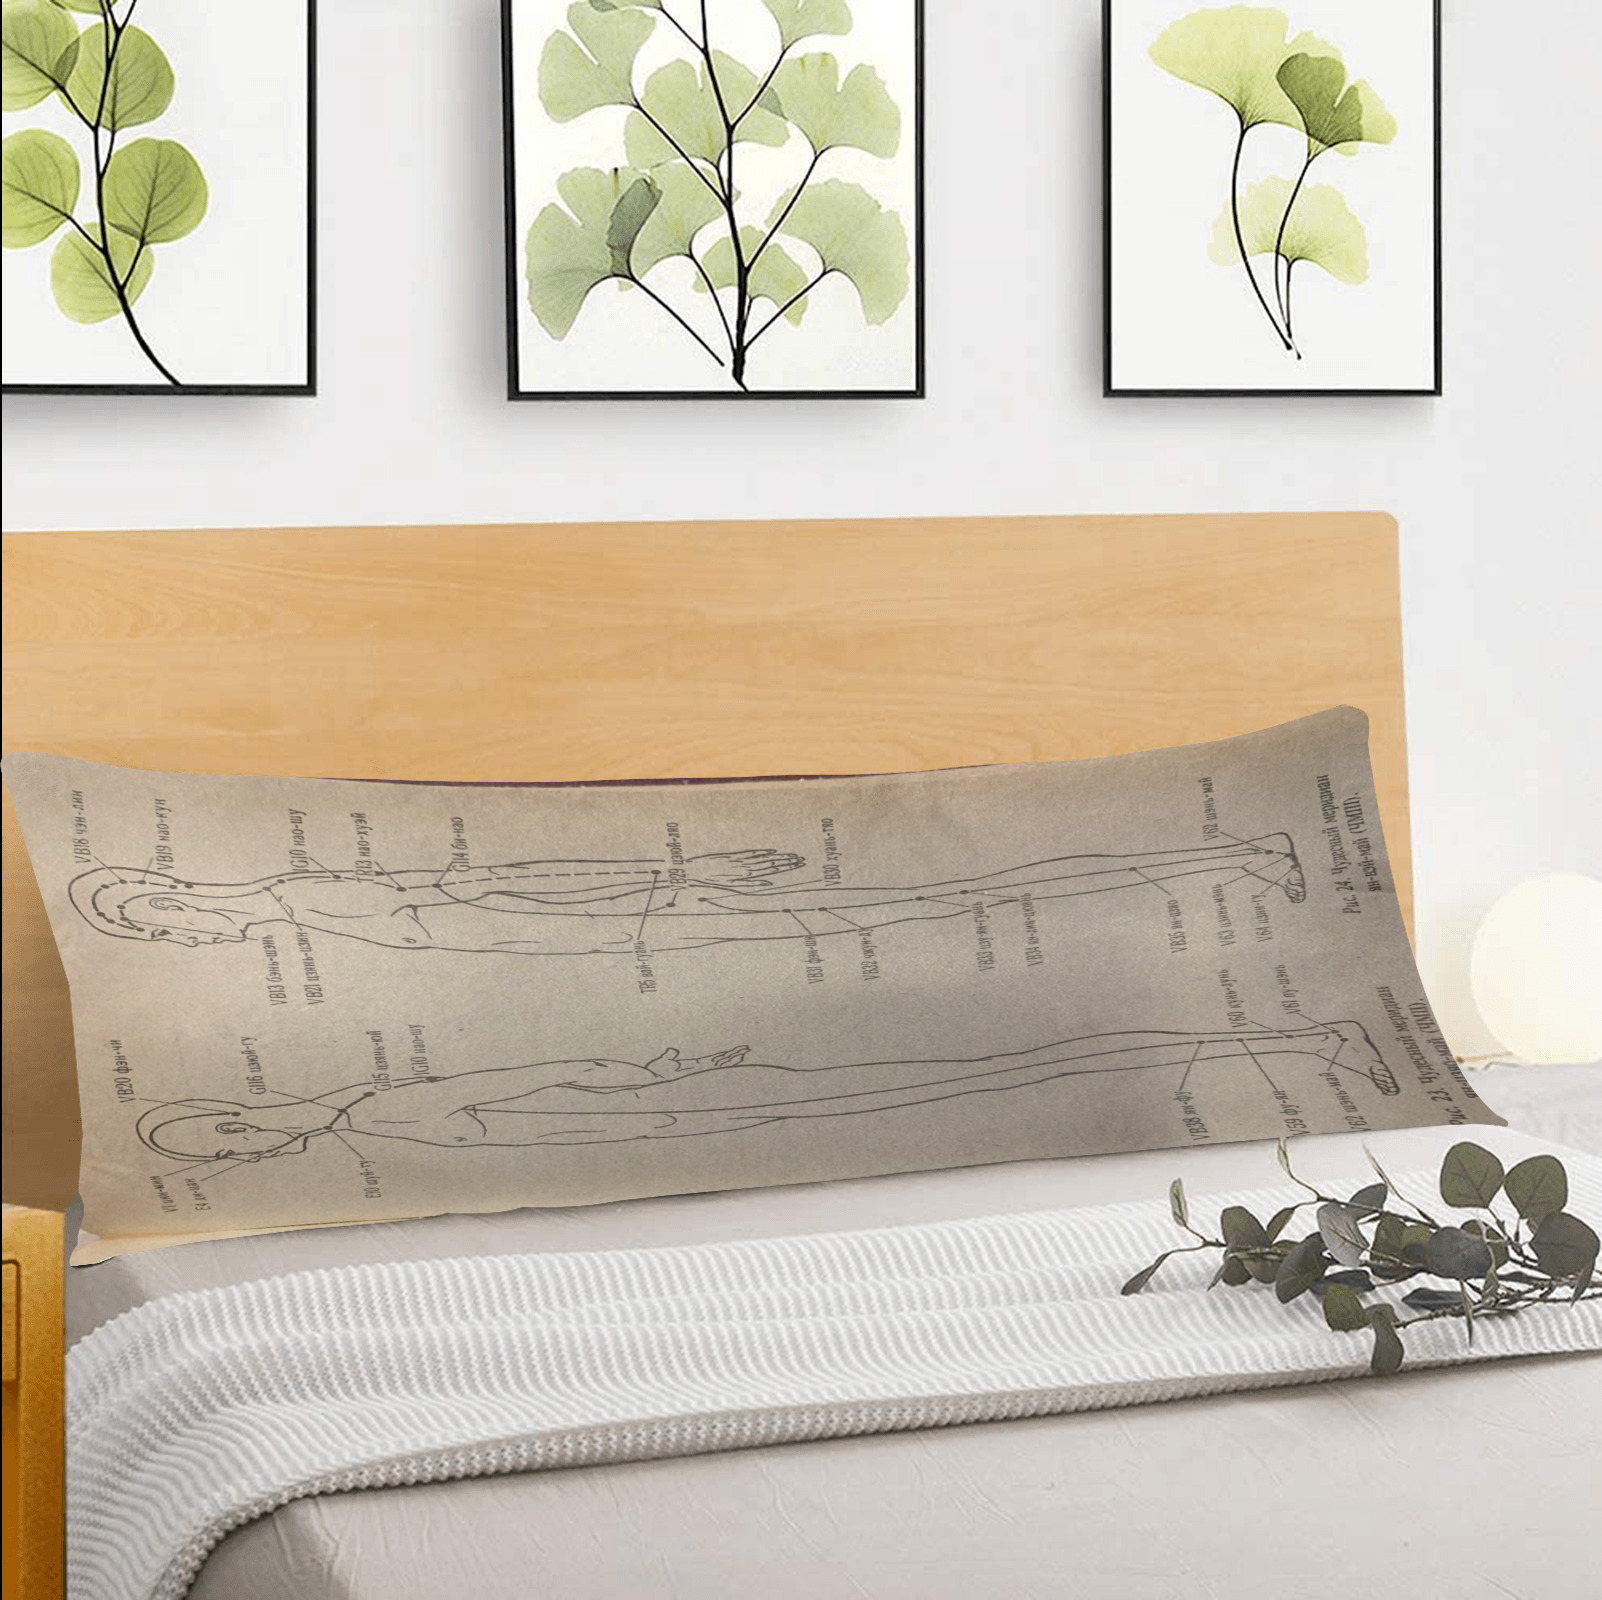 Du-may womderful meridian. Body Pillow Case 20" x 54" (Two Sides)